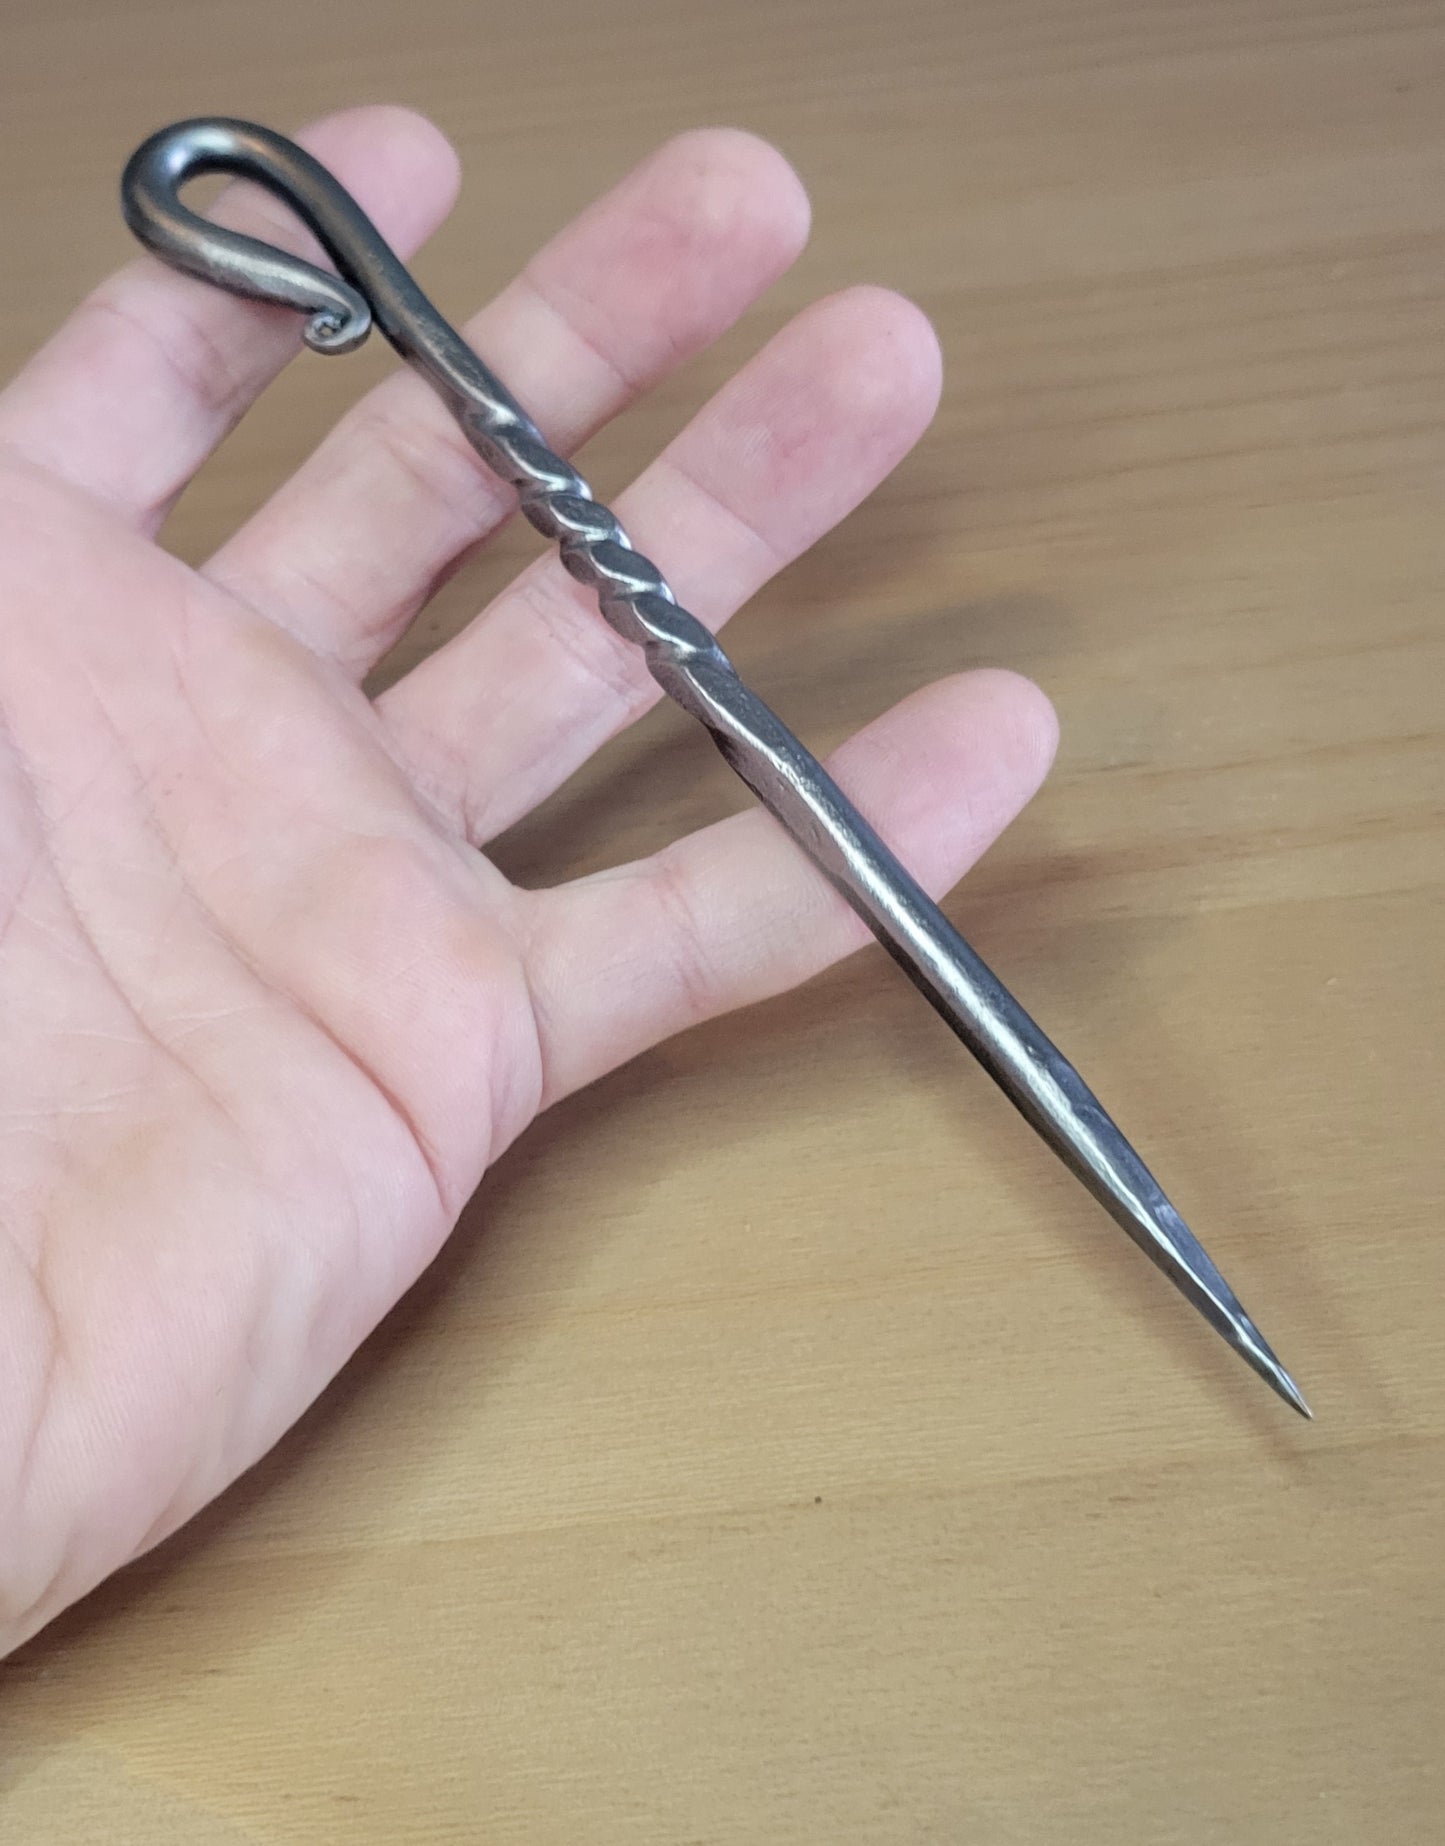 leather scribe, Merlin stick, forged hair pin